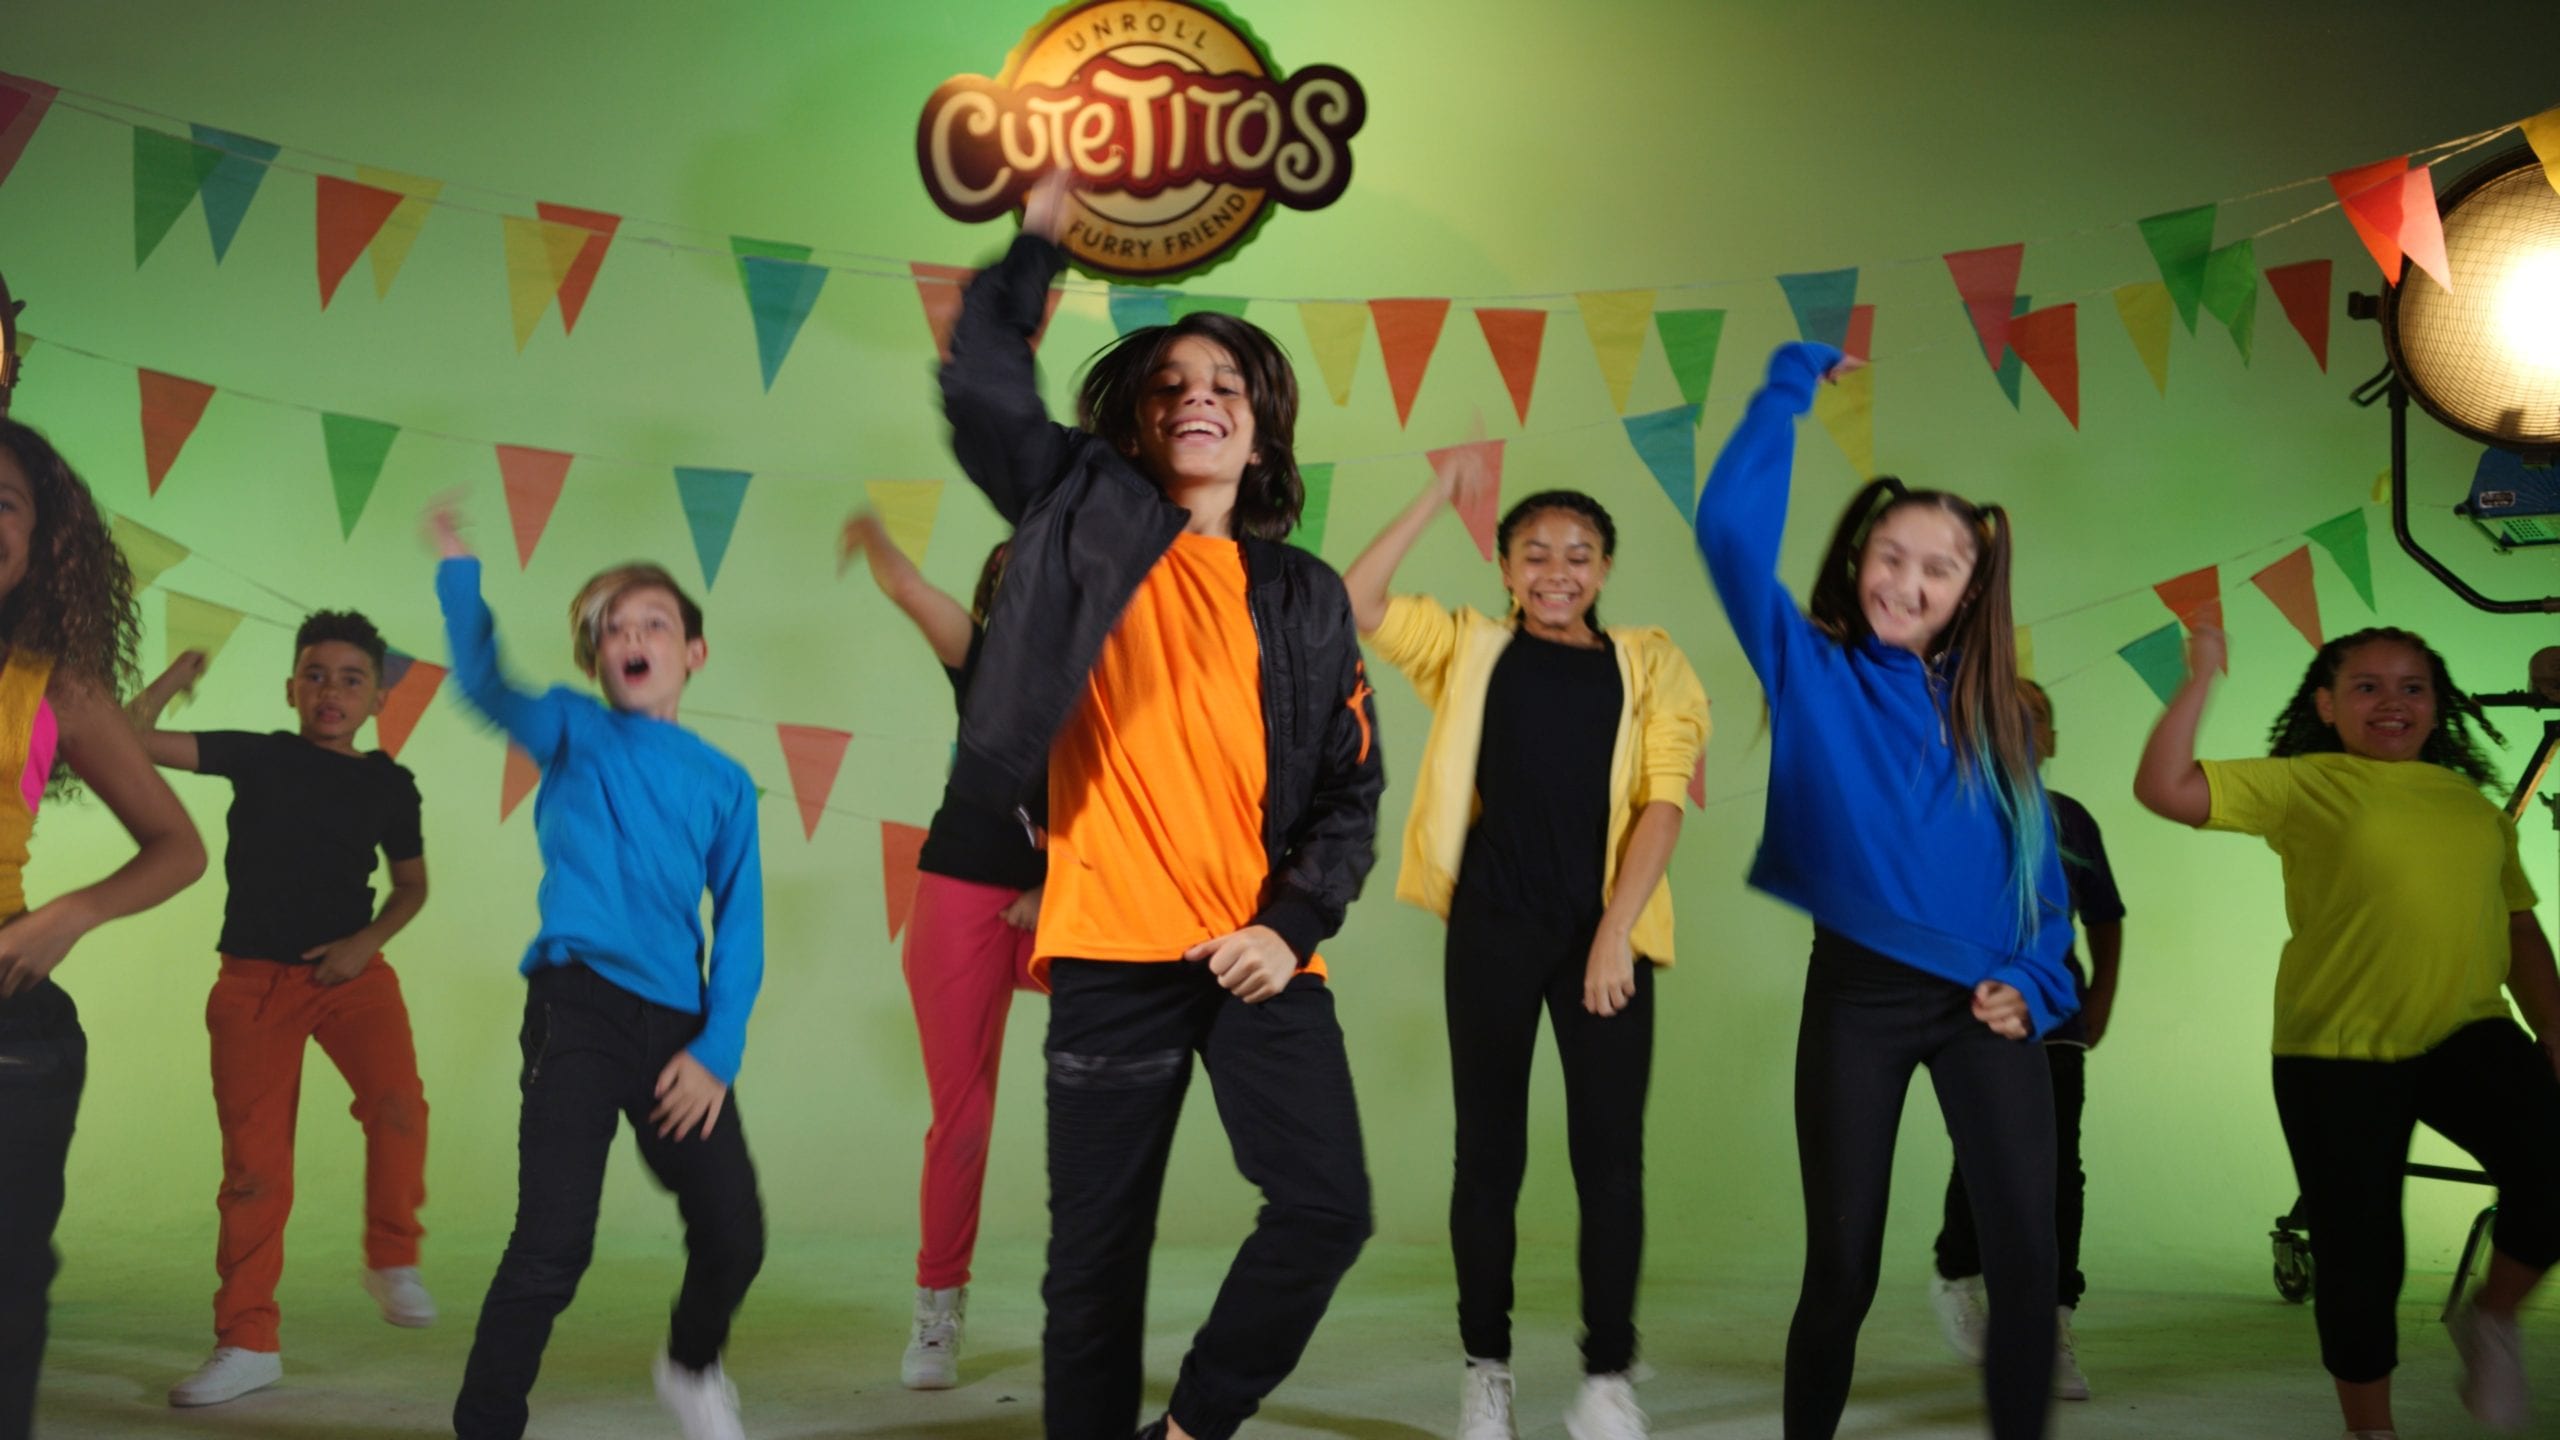 Group of smiling boys and girls dancing on set with a light green background